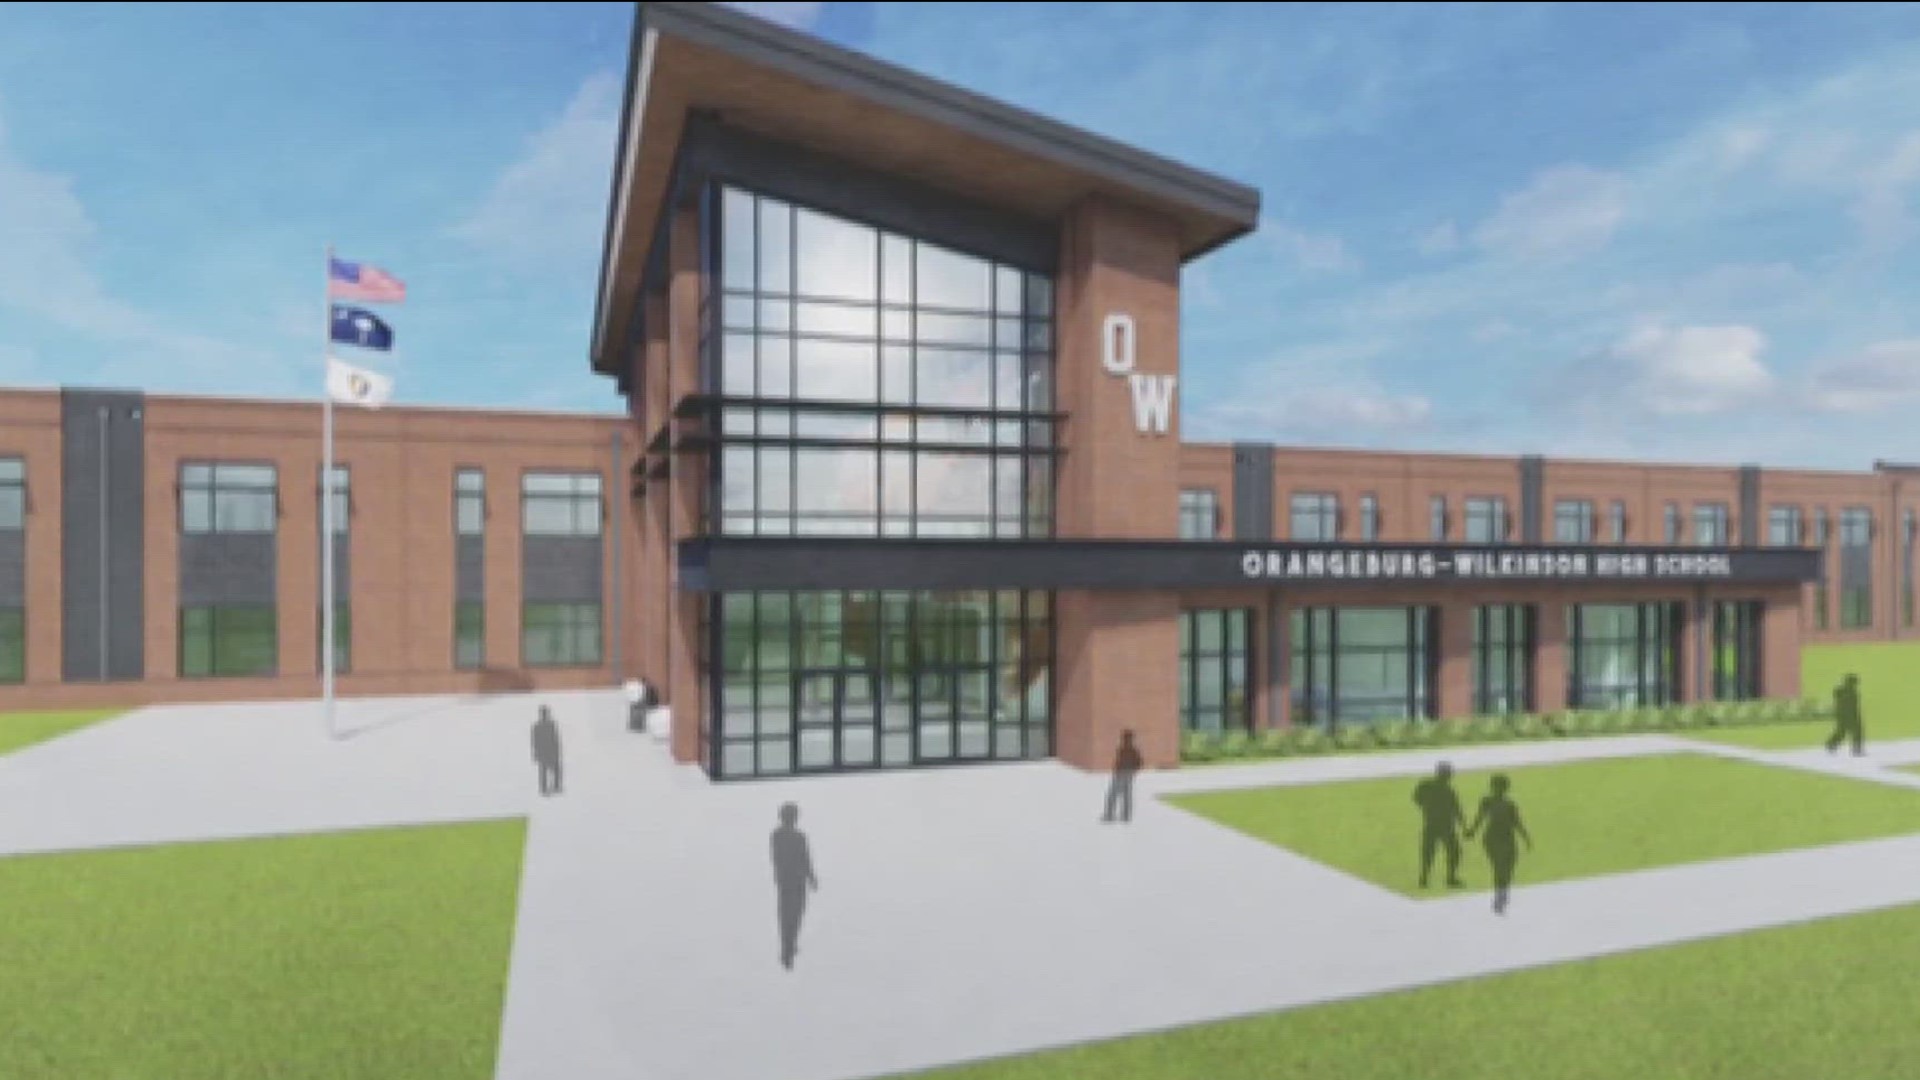 The Orangeburg County School District is moving ahead with plans for new Orangeburg-Wilkinson (O-W) High School, but not everyone is happy about it.